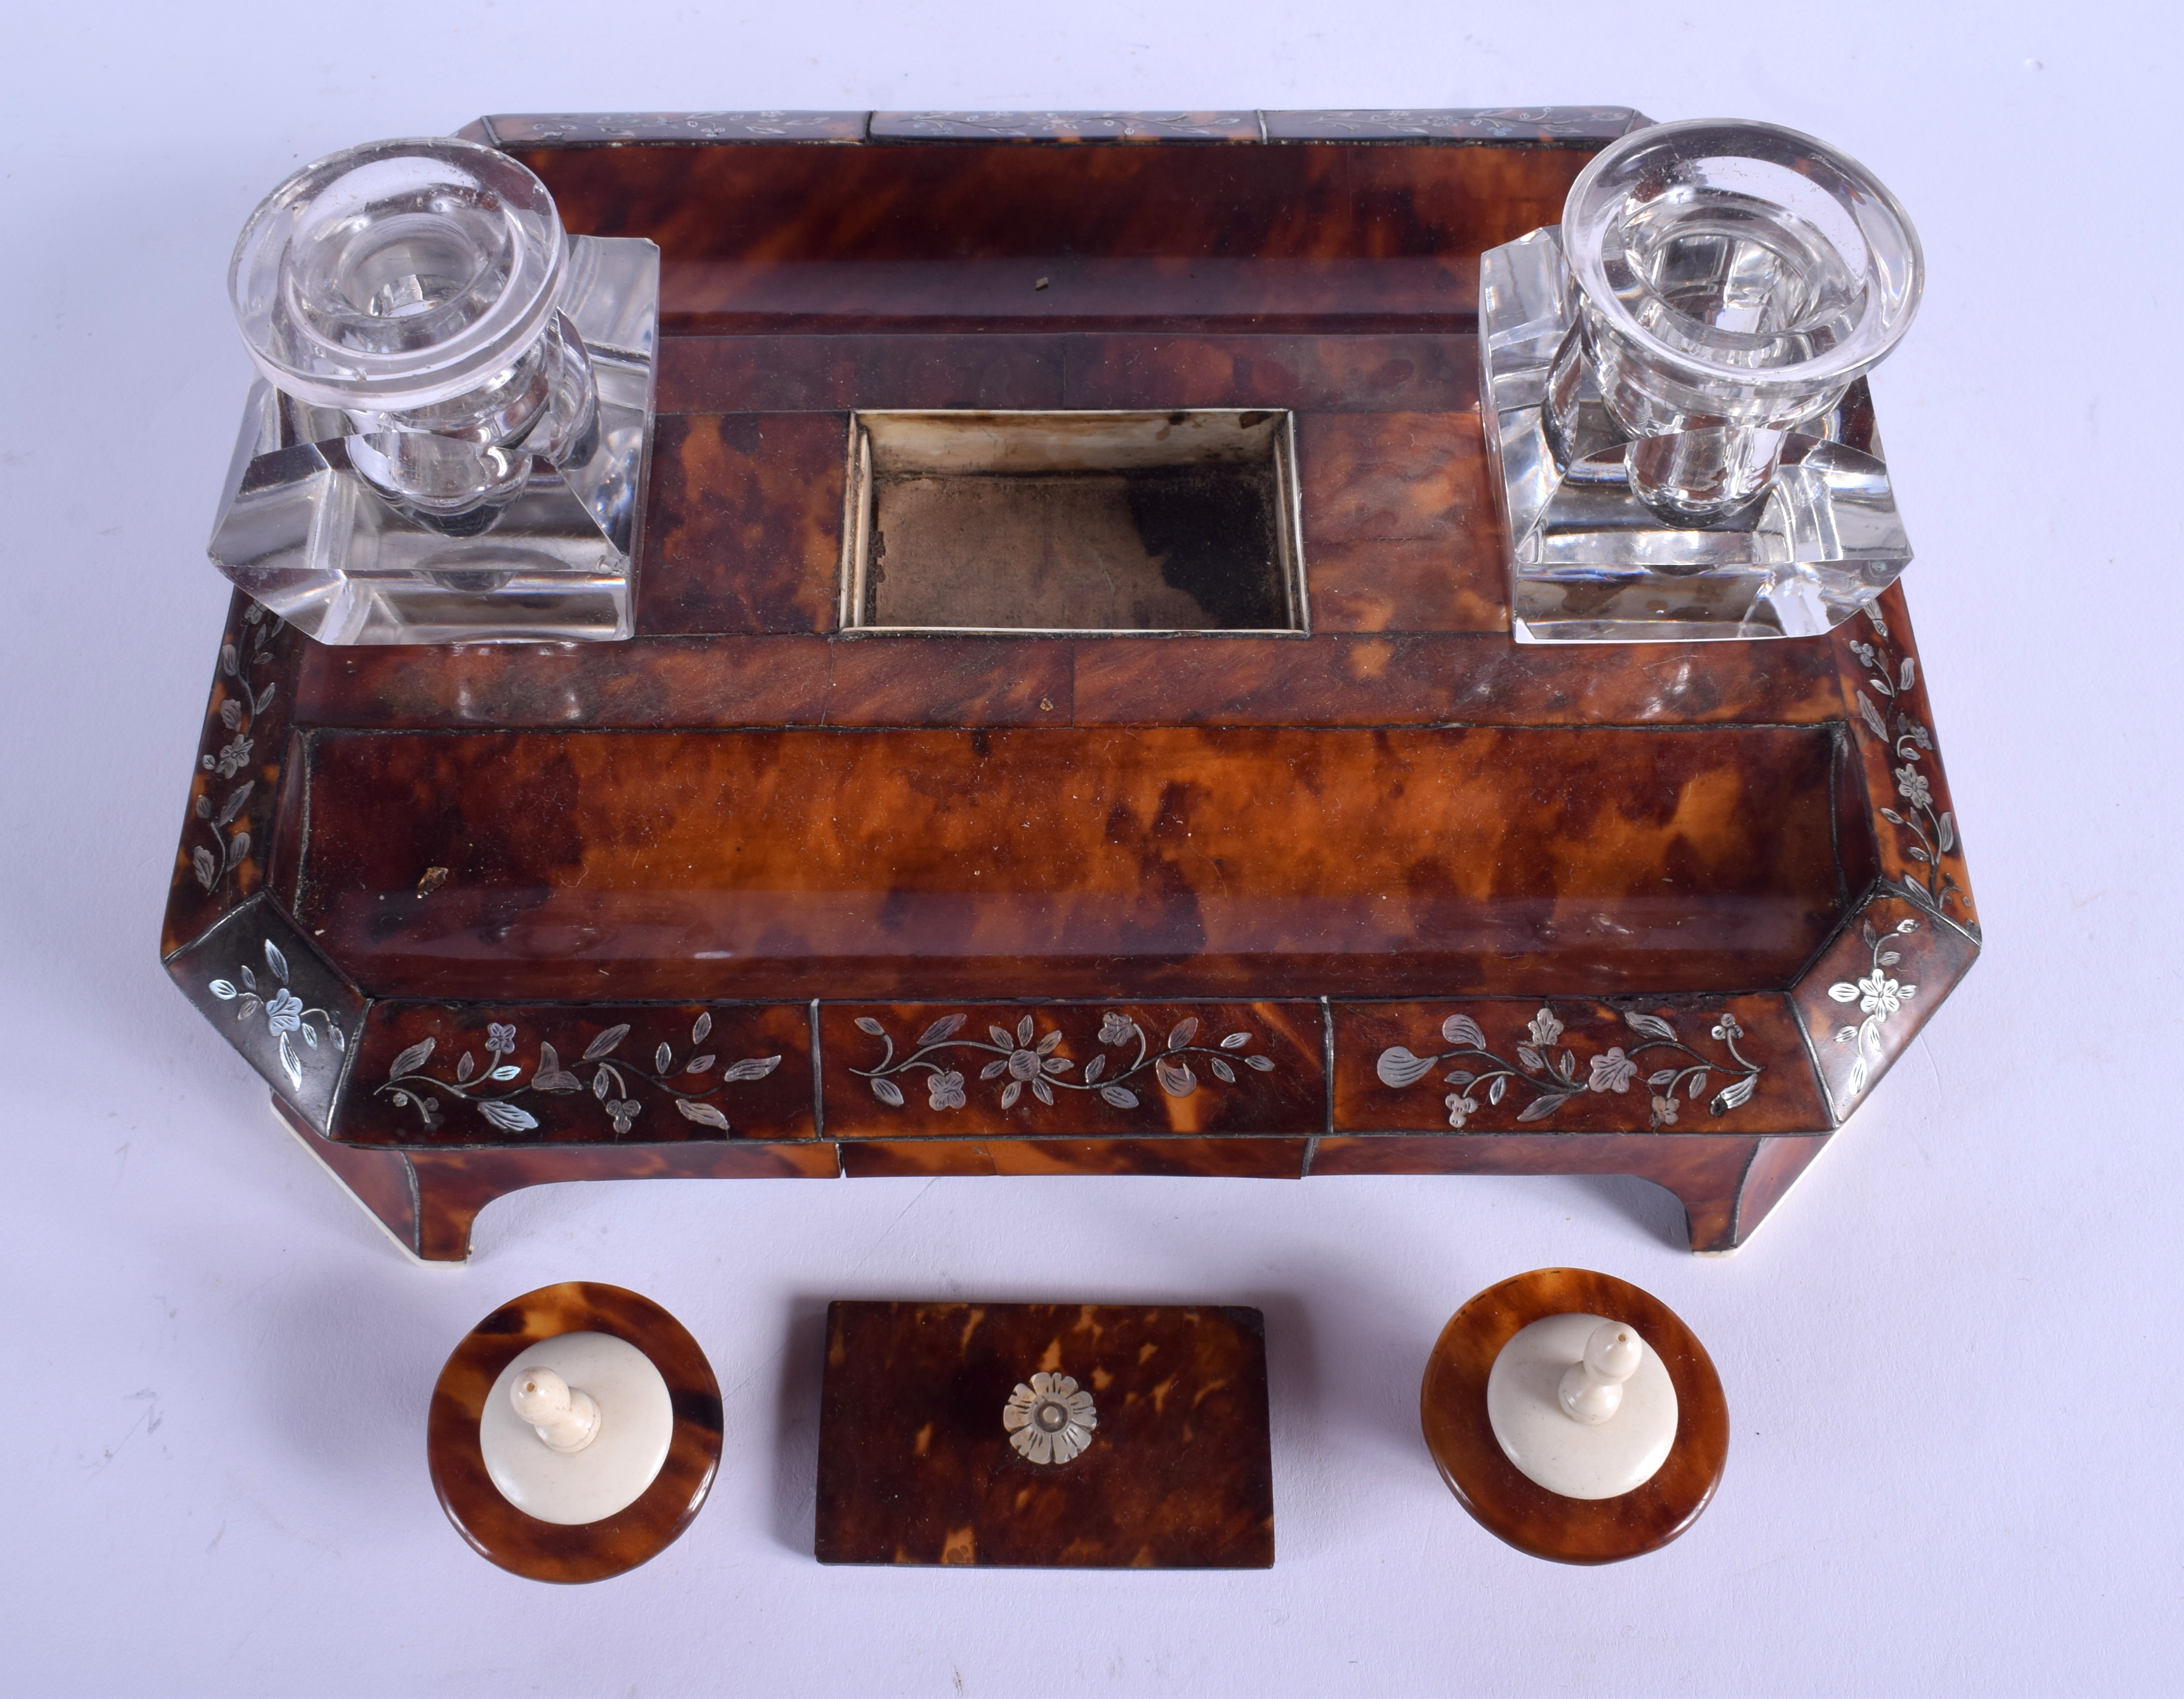 AN EARLY VICTORIAN MOTHER OF PEARL INLAID TORTOISESHELL INKWELL decorated with foliage. 21 cm x 14 c - Image 3 of 13